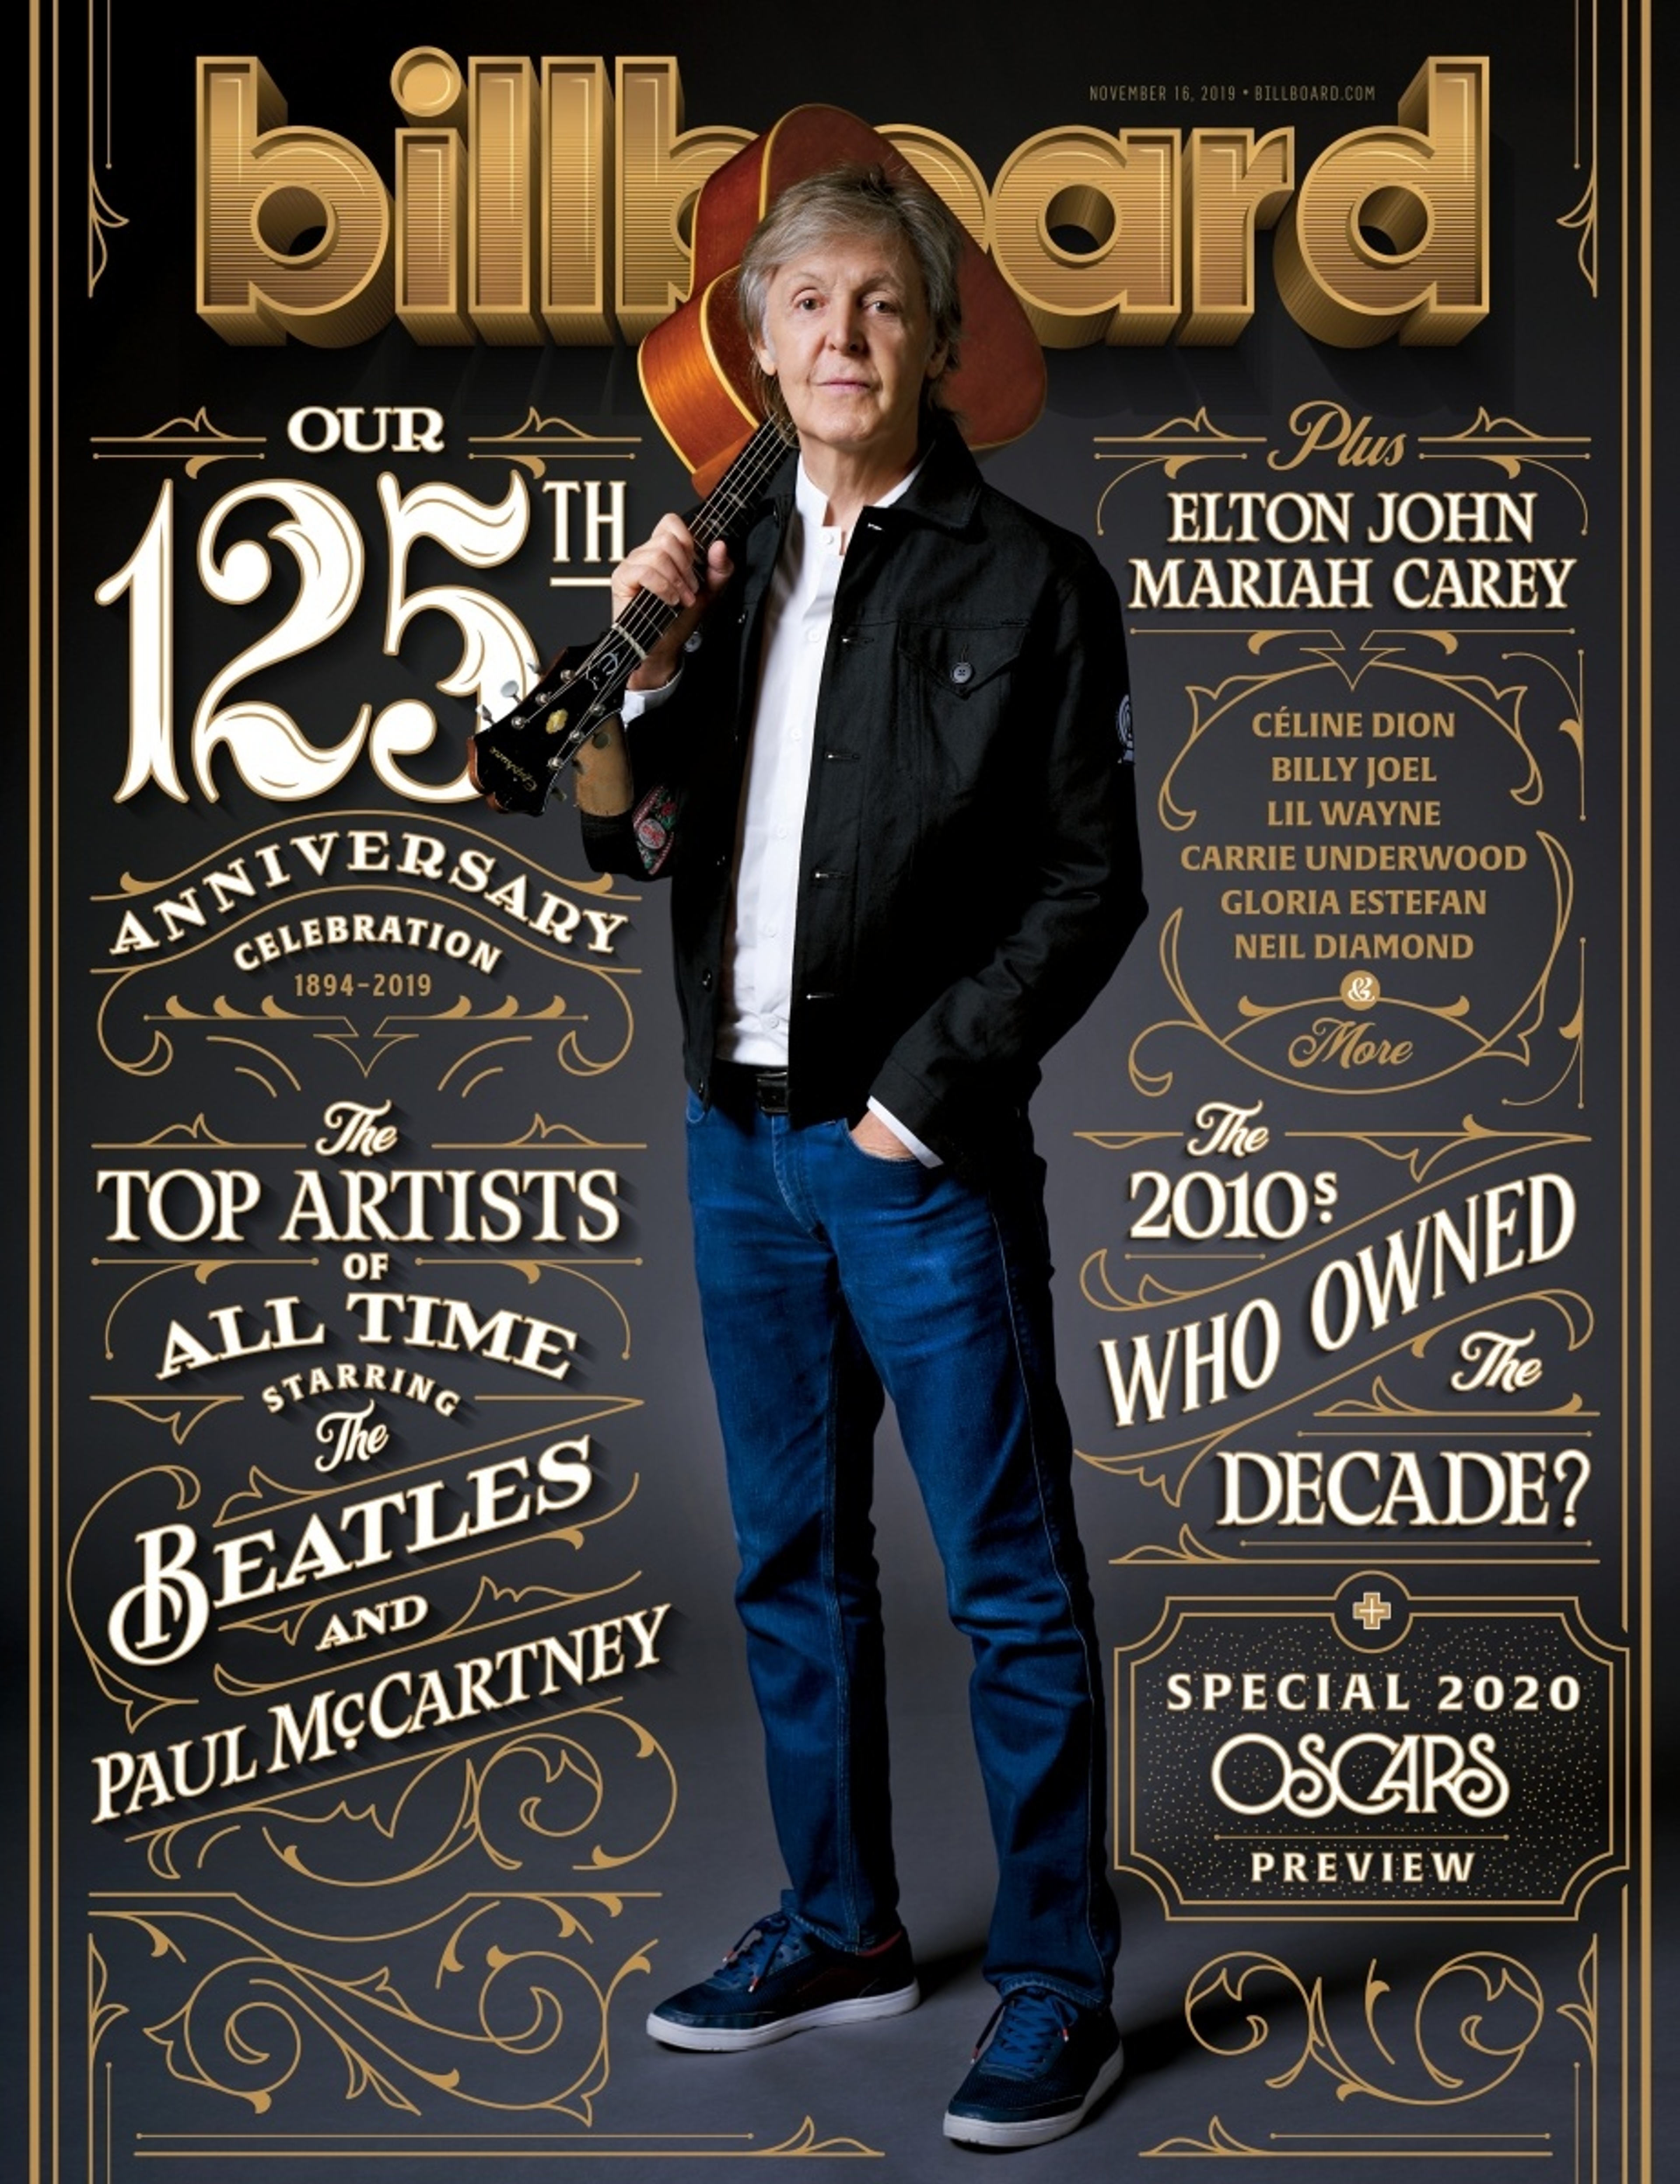 Paul on the cover of Billboard's 125th Anniversary magazine